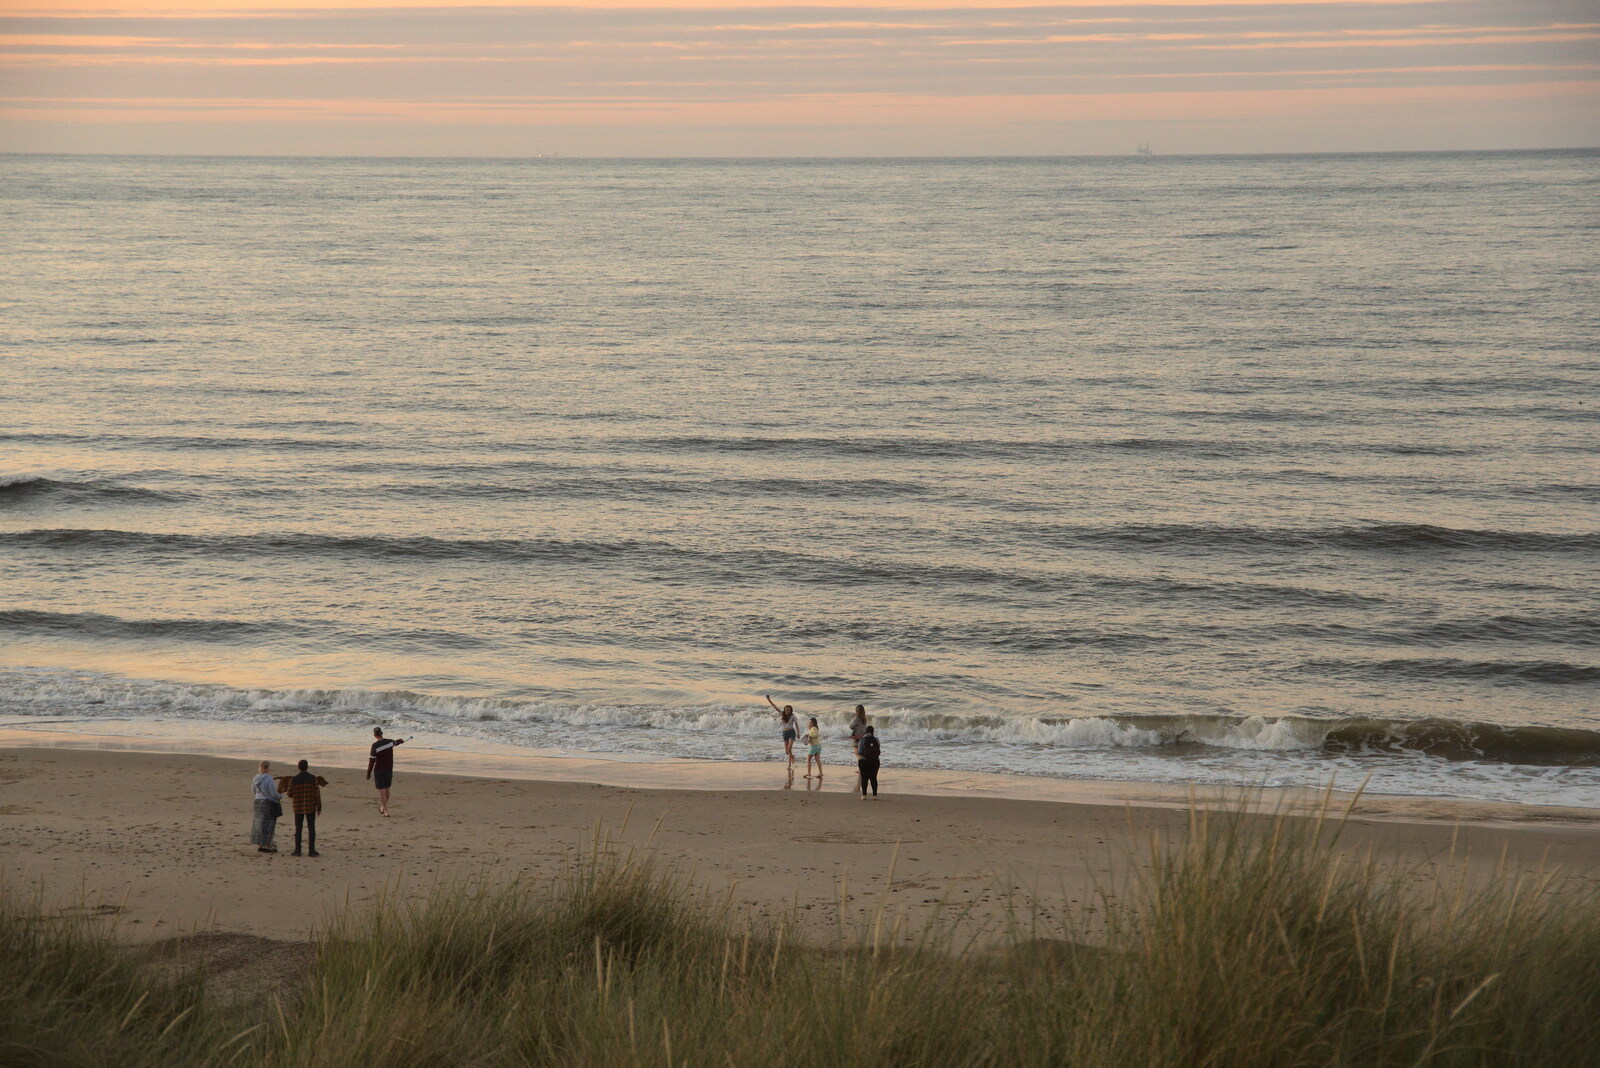 People on the beach from Camping in the Dunes, Waxham Sands, Norfolk - 9th July 2022